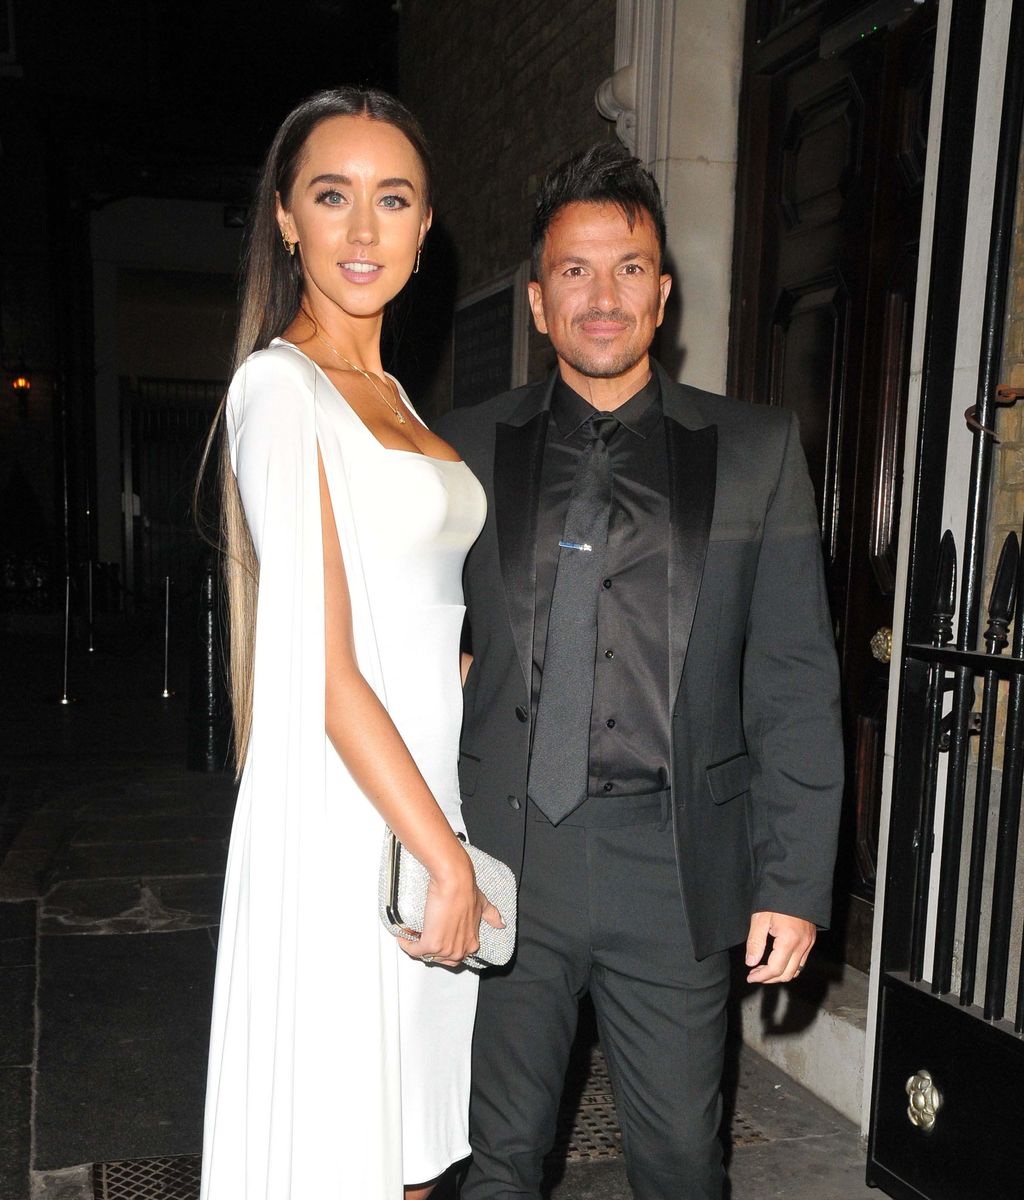 Emily MacDonagh in a white dress next to Peter Andre in a black suit